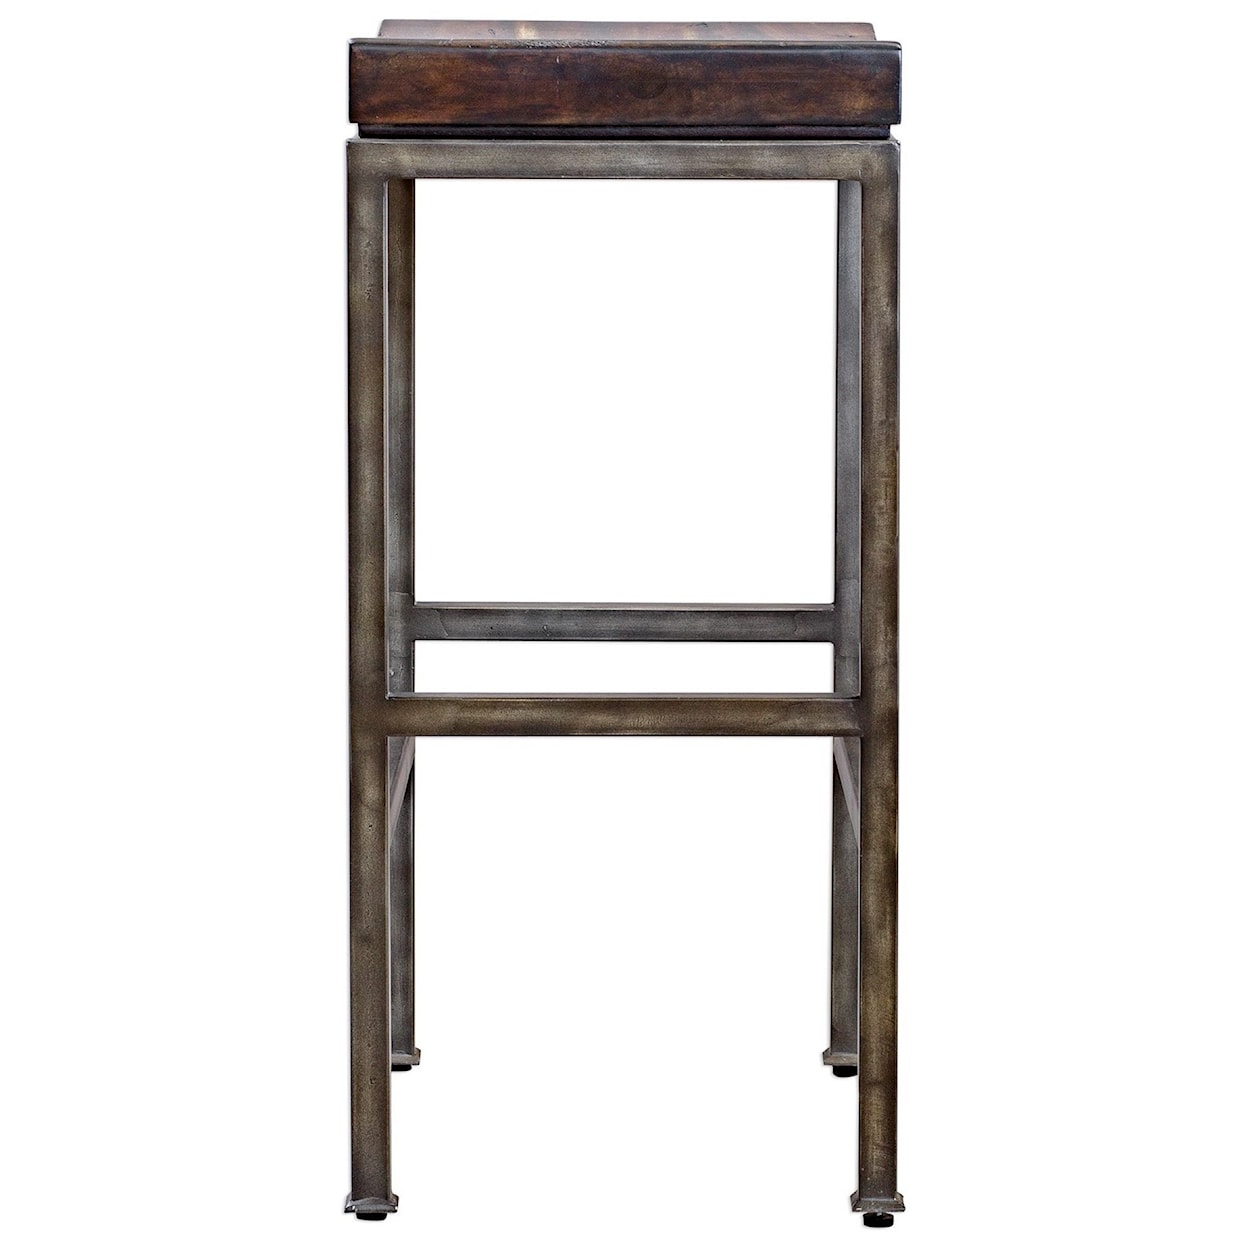 Uttermost Accent Furniture - Stools Beck Industrial Bar Stool